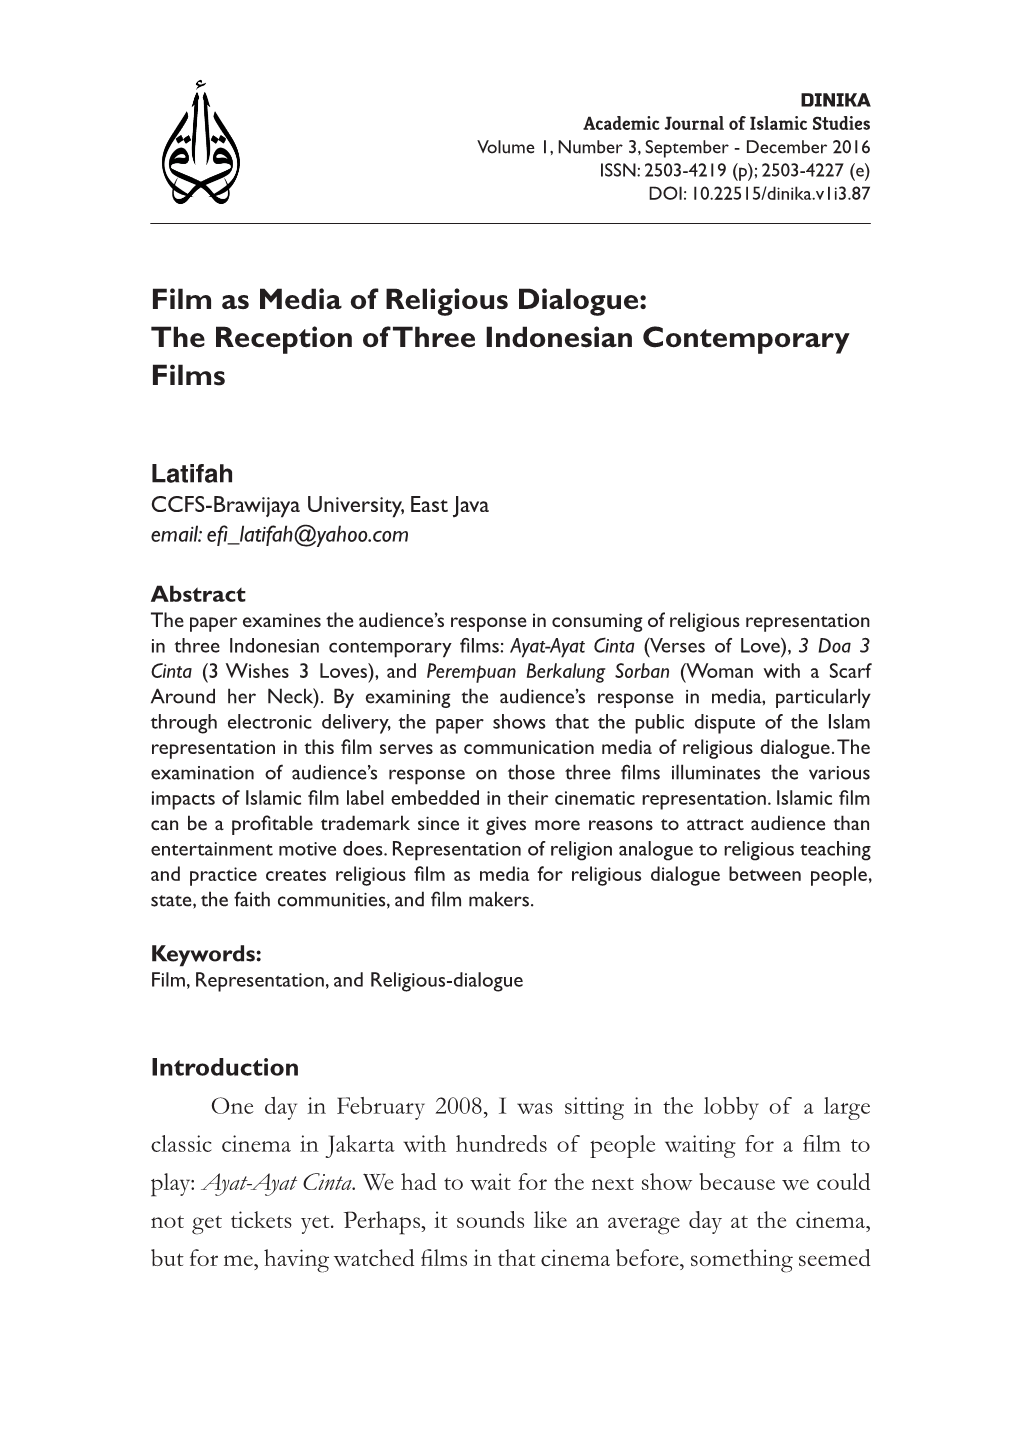 Film As Media of Religious Dialogue: the Reception of Three Indonesian Contemporary Films